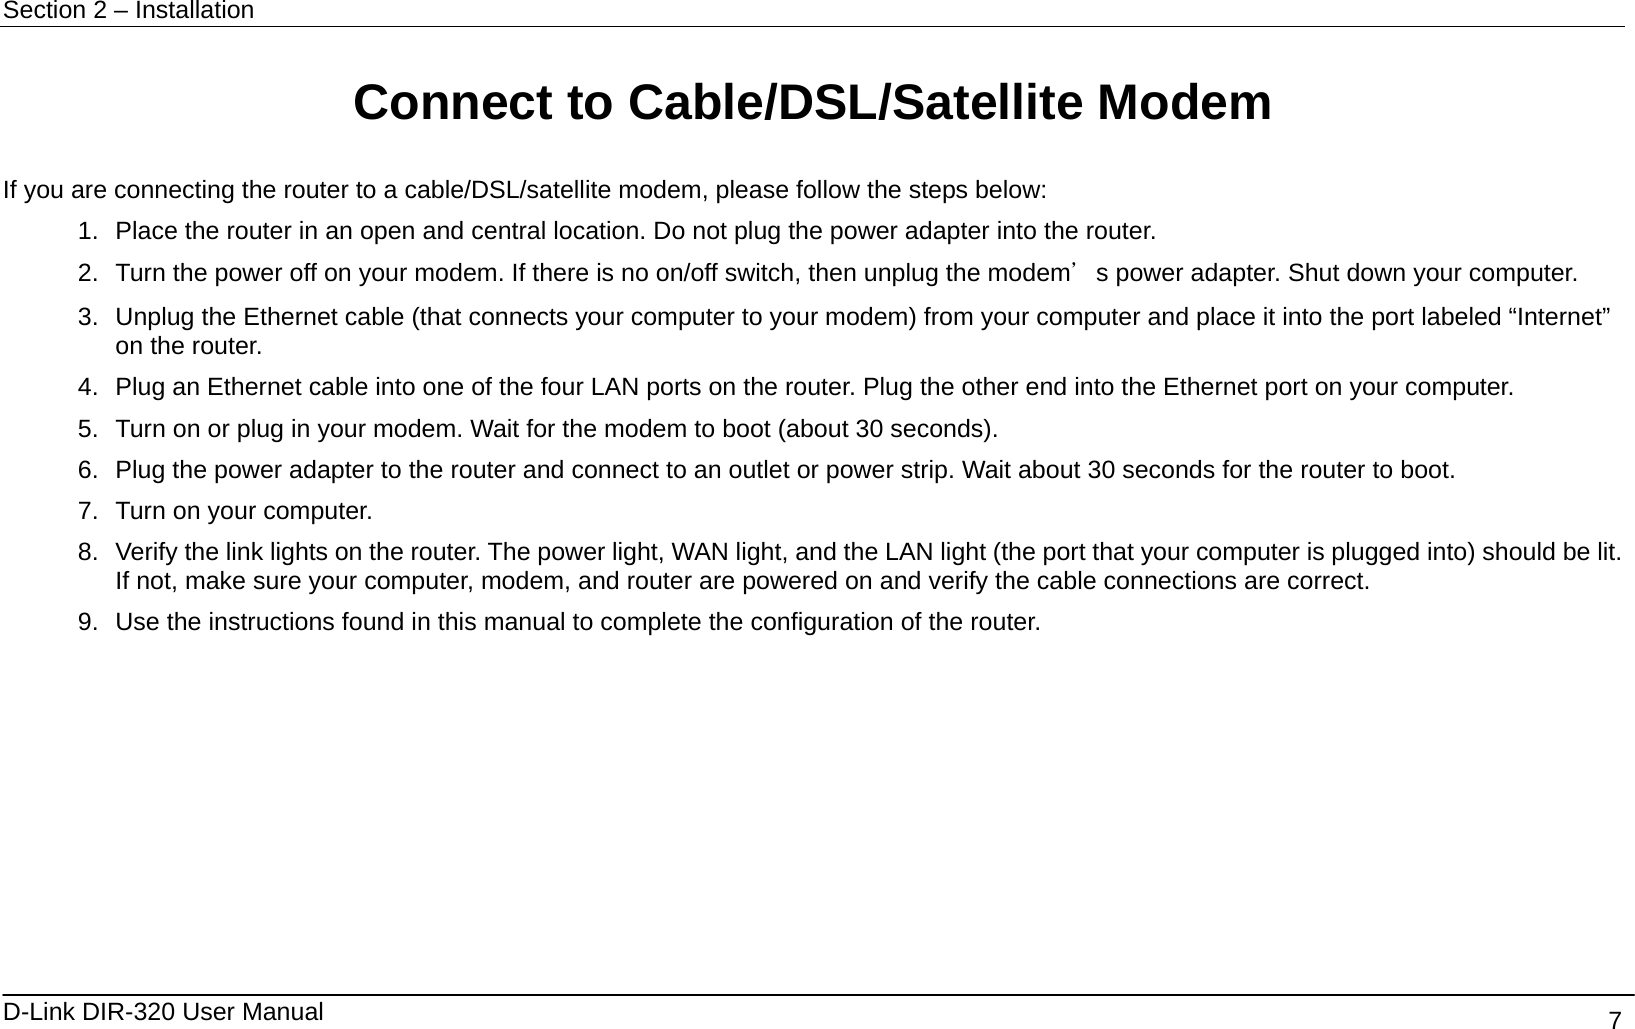 Section 2 – Installation   D-Link DIR-320 User Manual                                       7 Connect to Cable/DSL/Satellite Modem  If you are connecting the router to a cable/DSL/satellite modem, please follow the steps below: 1.  Place the router in an open and central location. Do not plug the power adapter into the router. 2.  Turn the power off on your modem. If there is no on/off switch, then unplug the modem＇s power adapter. Shut down your computer. 3.  Unplug the Ethernet cable (that connects your computer to your modem) from your computer and place it into the port labeled “Internet” on the router. 4.  Plug an Ethernet cable into one of the four LAN ports on the router. Plug the other end into the Ethernet port on your computer. 5.  Turn on or plug in your modem. Wait for the modem to boot (about 30 seconds). 6.  Plug the power adapter to the router and connect to an outlet or power strip. Wait about 30 seconds for the router to boot. 7.  Turn on your computer. 8.  Verify the link lights on the router. The power light, WAN light, and the LAN light (the port that your computer is plugged into) should be lit. If not, make sure your computer, modem, and router are powered on and verify the cable connections are correct. 9.  Use the instructions found in this manual to complete the configuration of the router.  